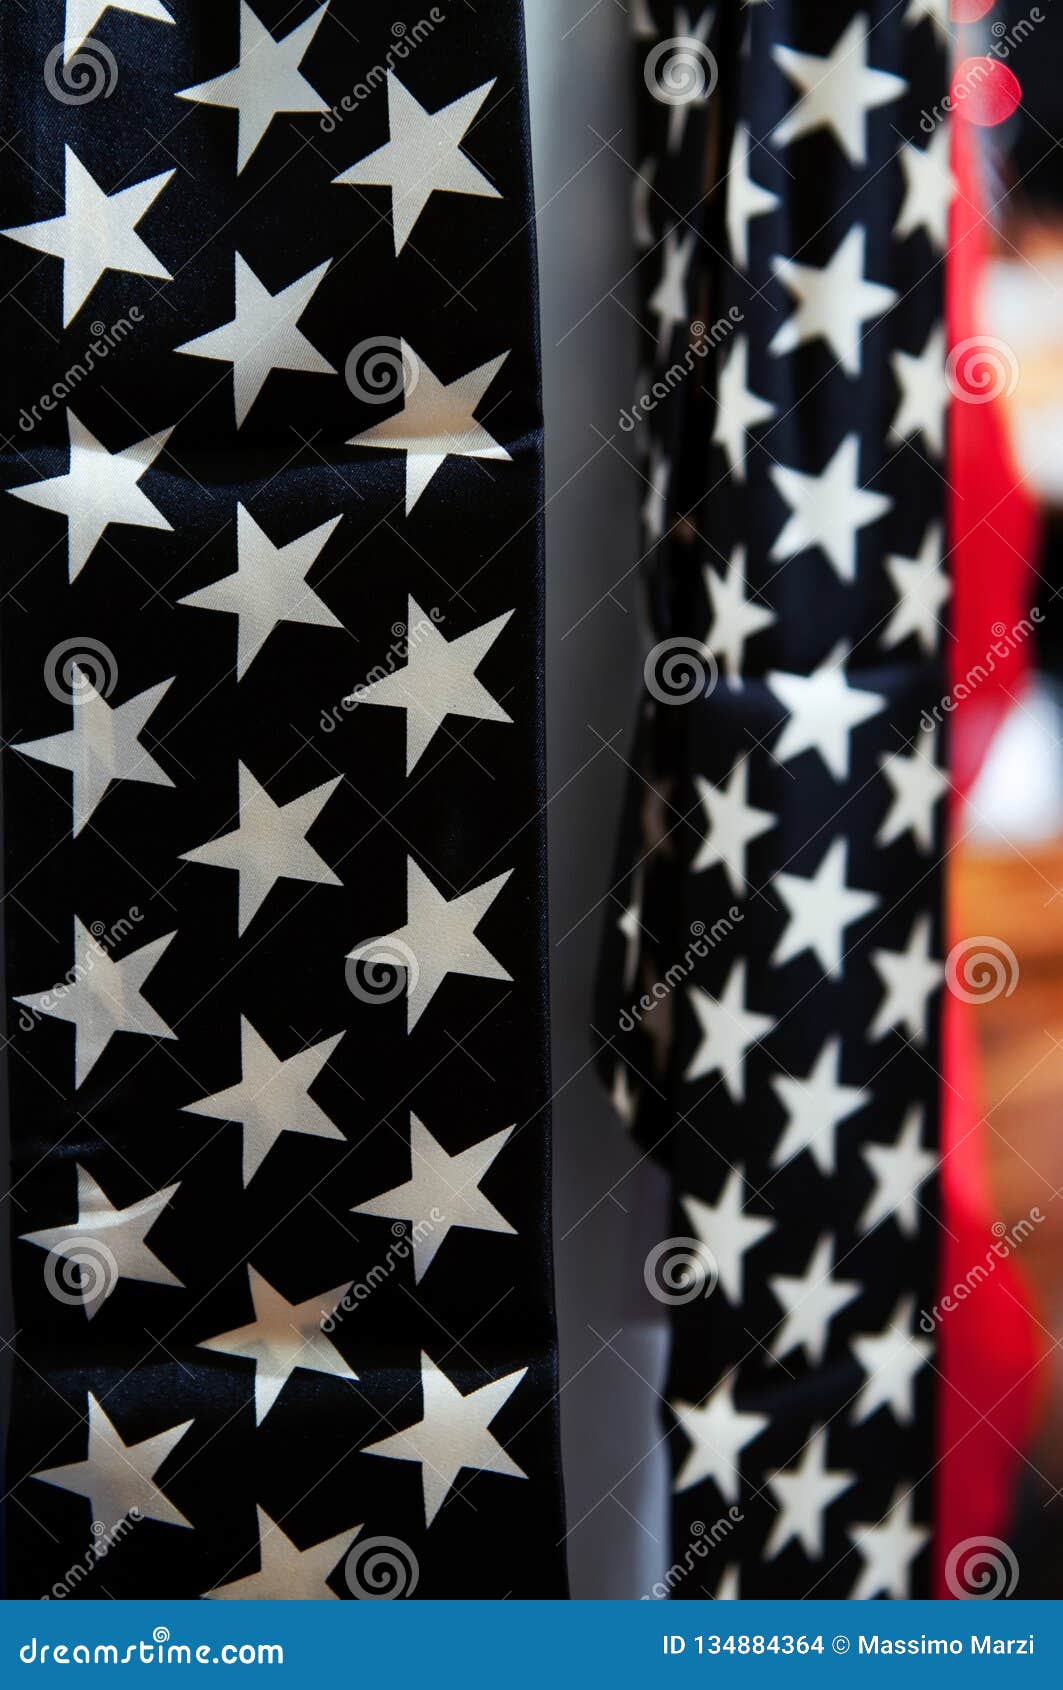 Stars and stripes, the colors of the American flag. Blue, white stars, is the American flag powerful symbol of an important story